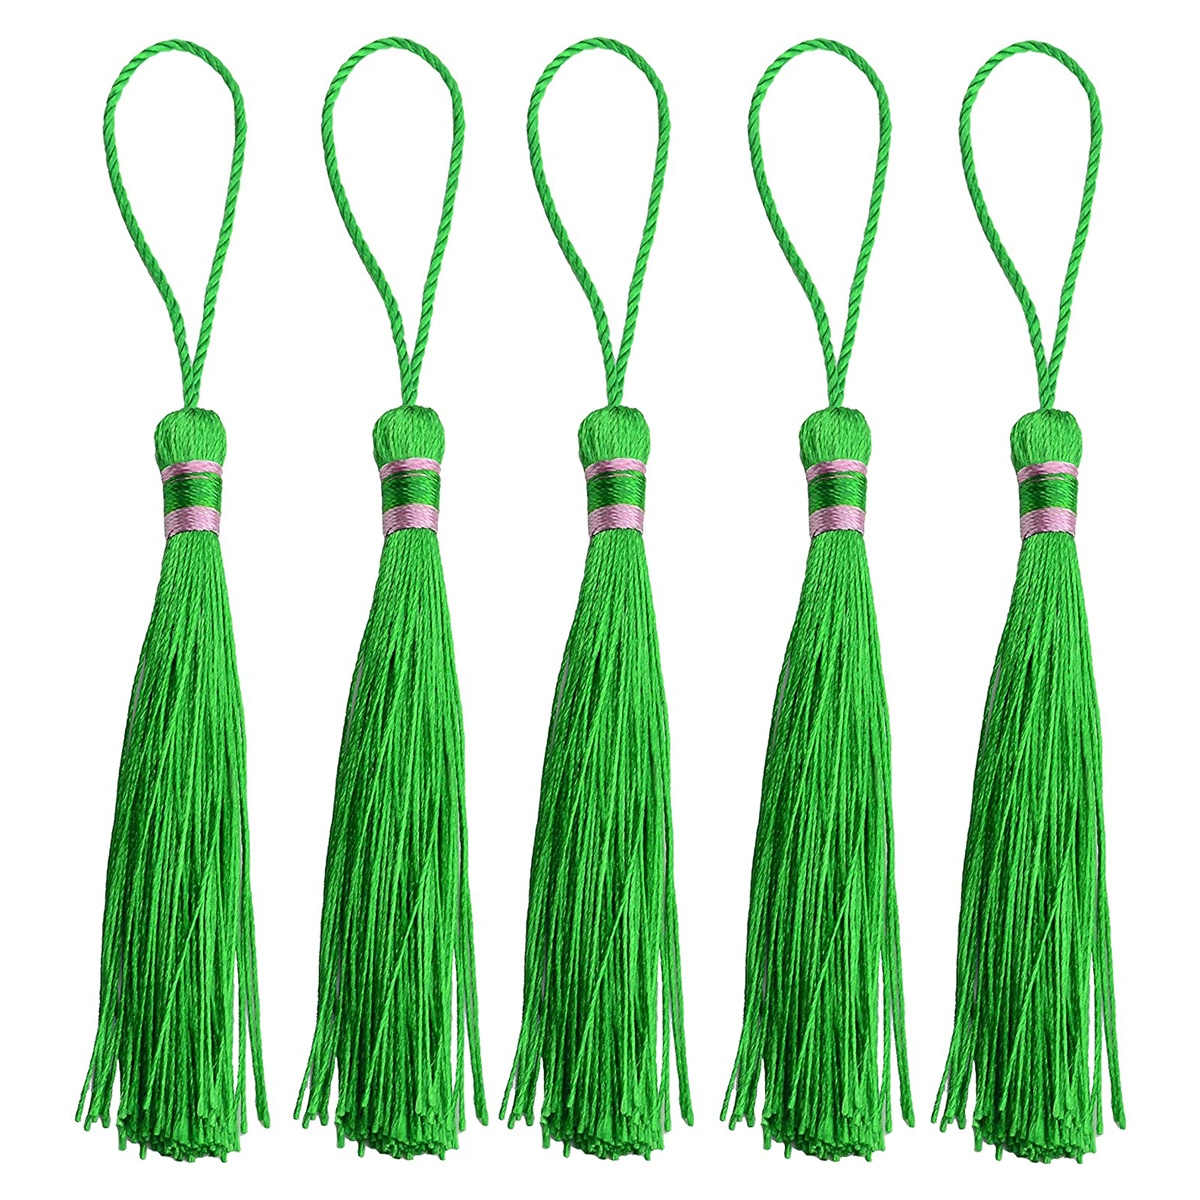 5.5 Inch Silky Floss Bookmark Tassels with Cord Loop  Bookmarks, DIY Craft Accessory (Green)